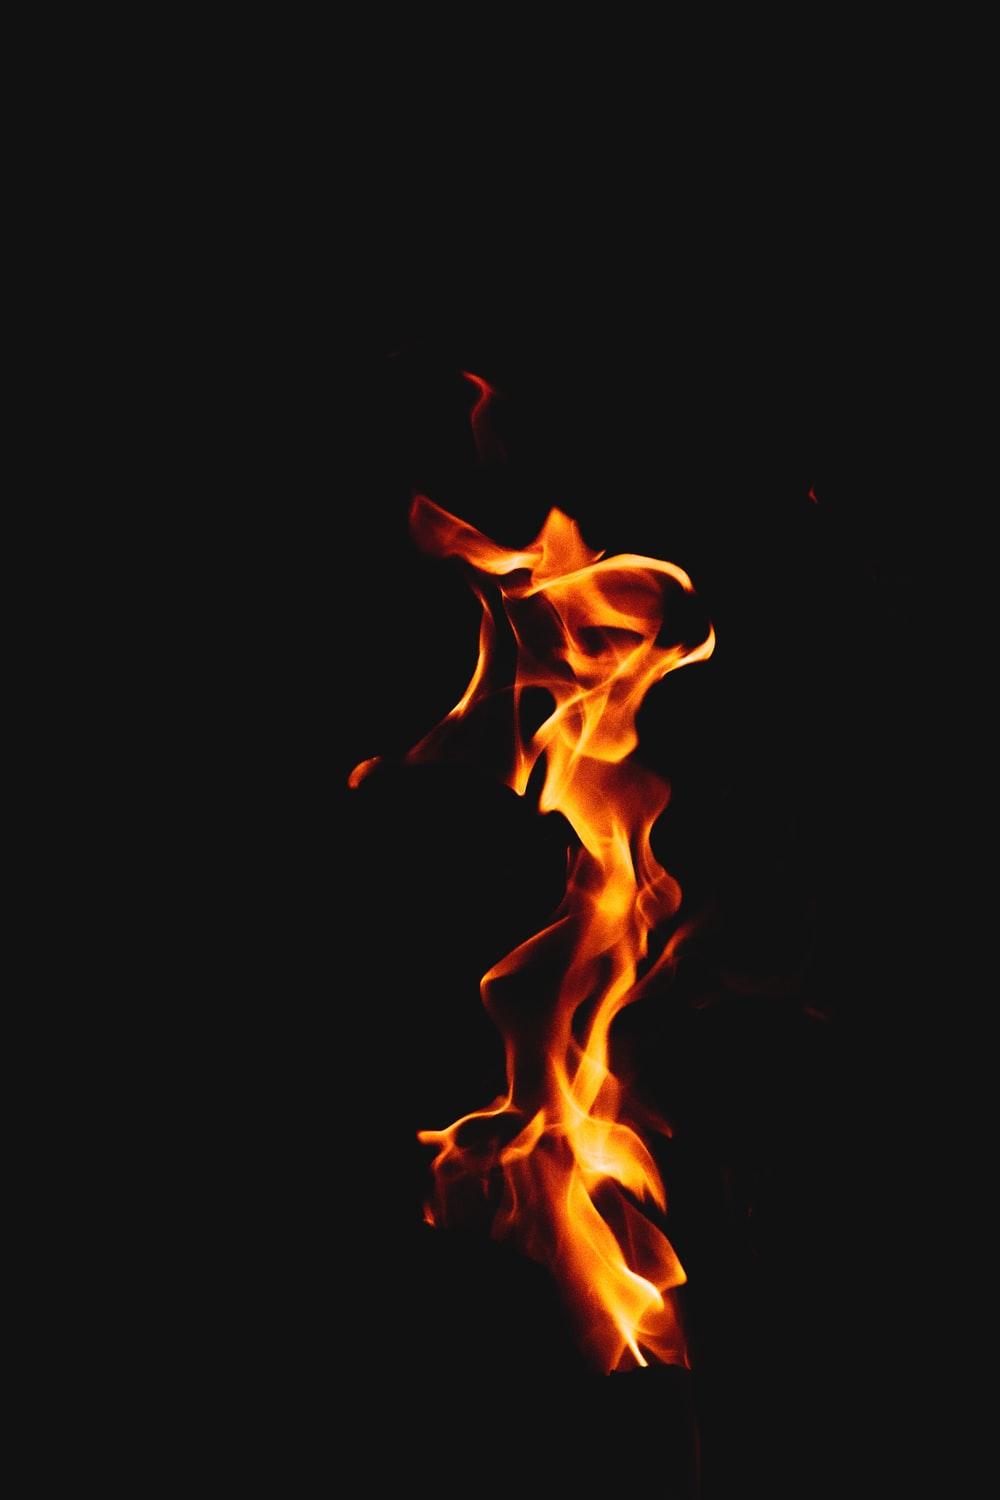 Flame Picture. Download Free Image